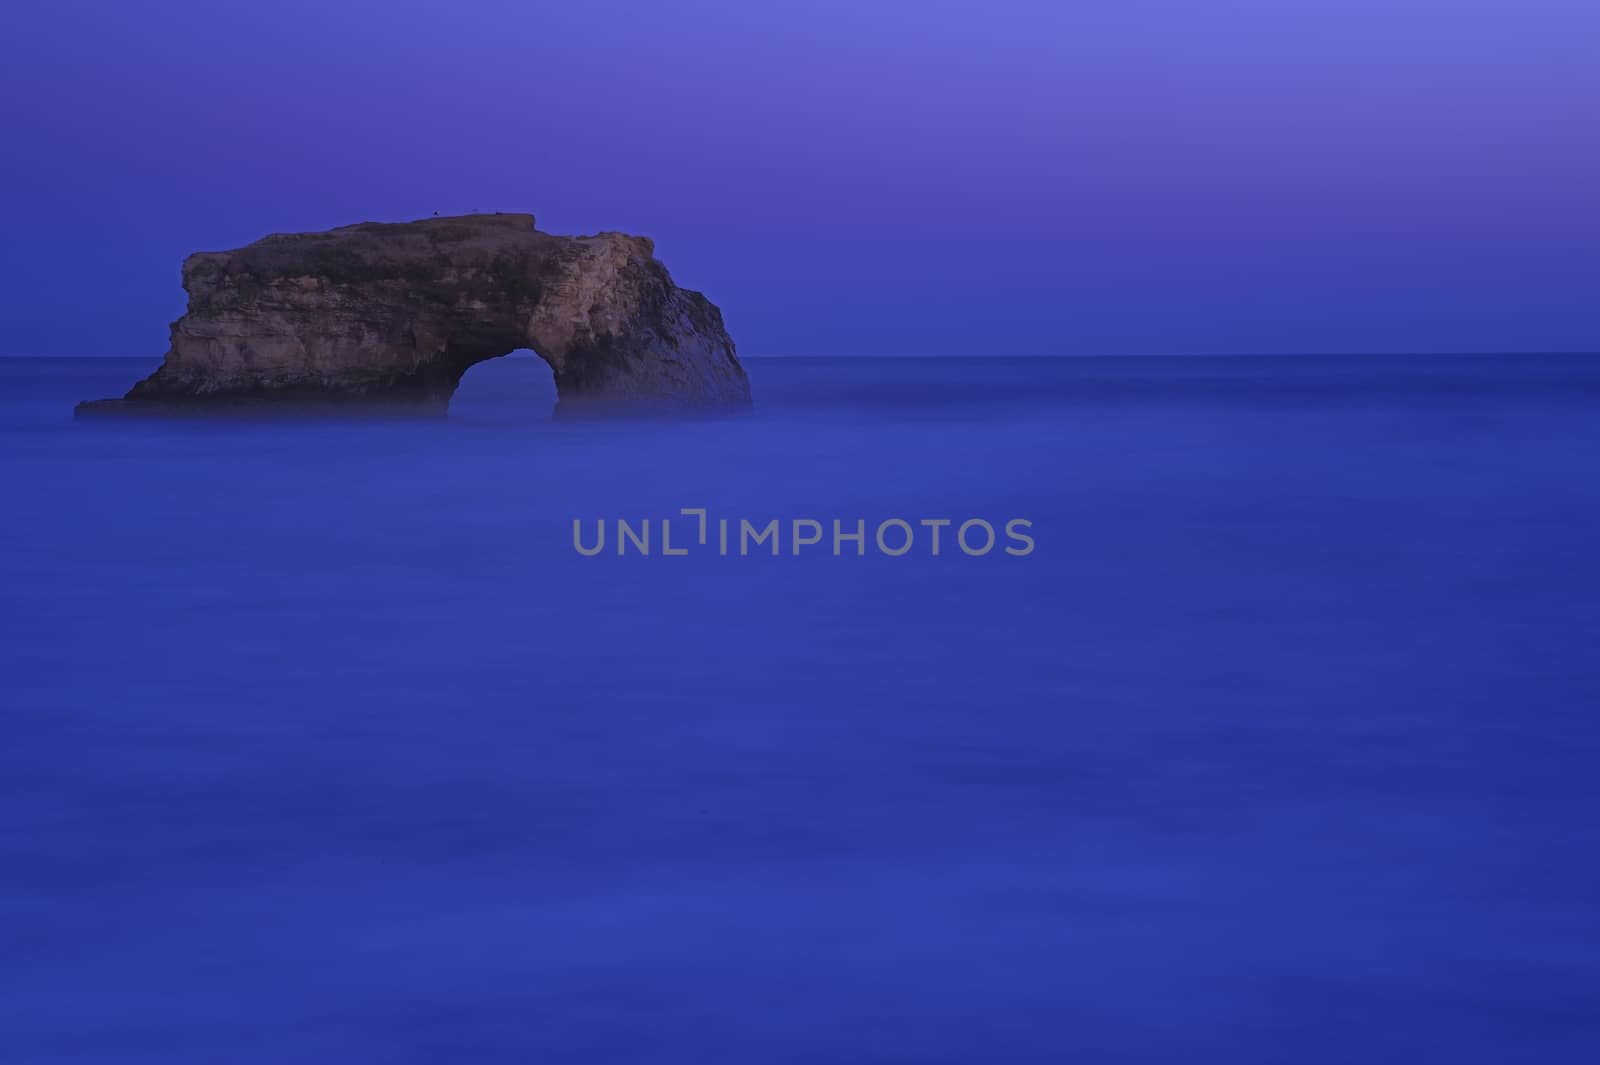 Natural Bridges rock in the Beach of Santa Cruz, California, USA. With ocean wave in the foreground.